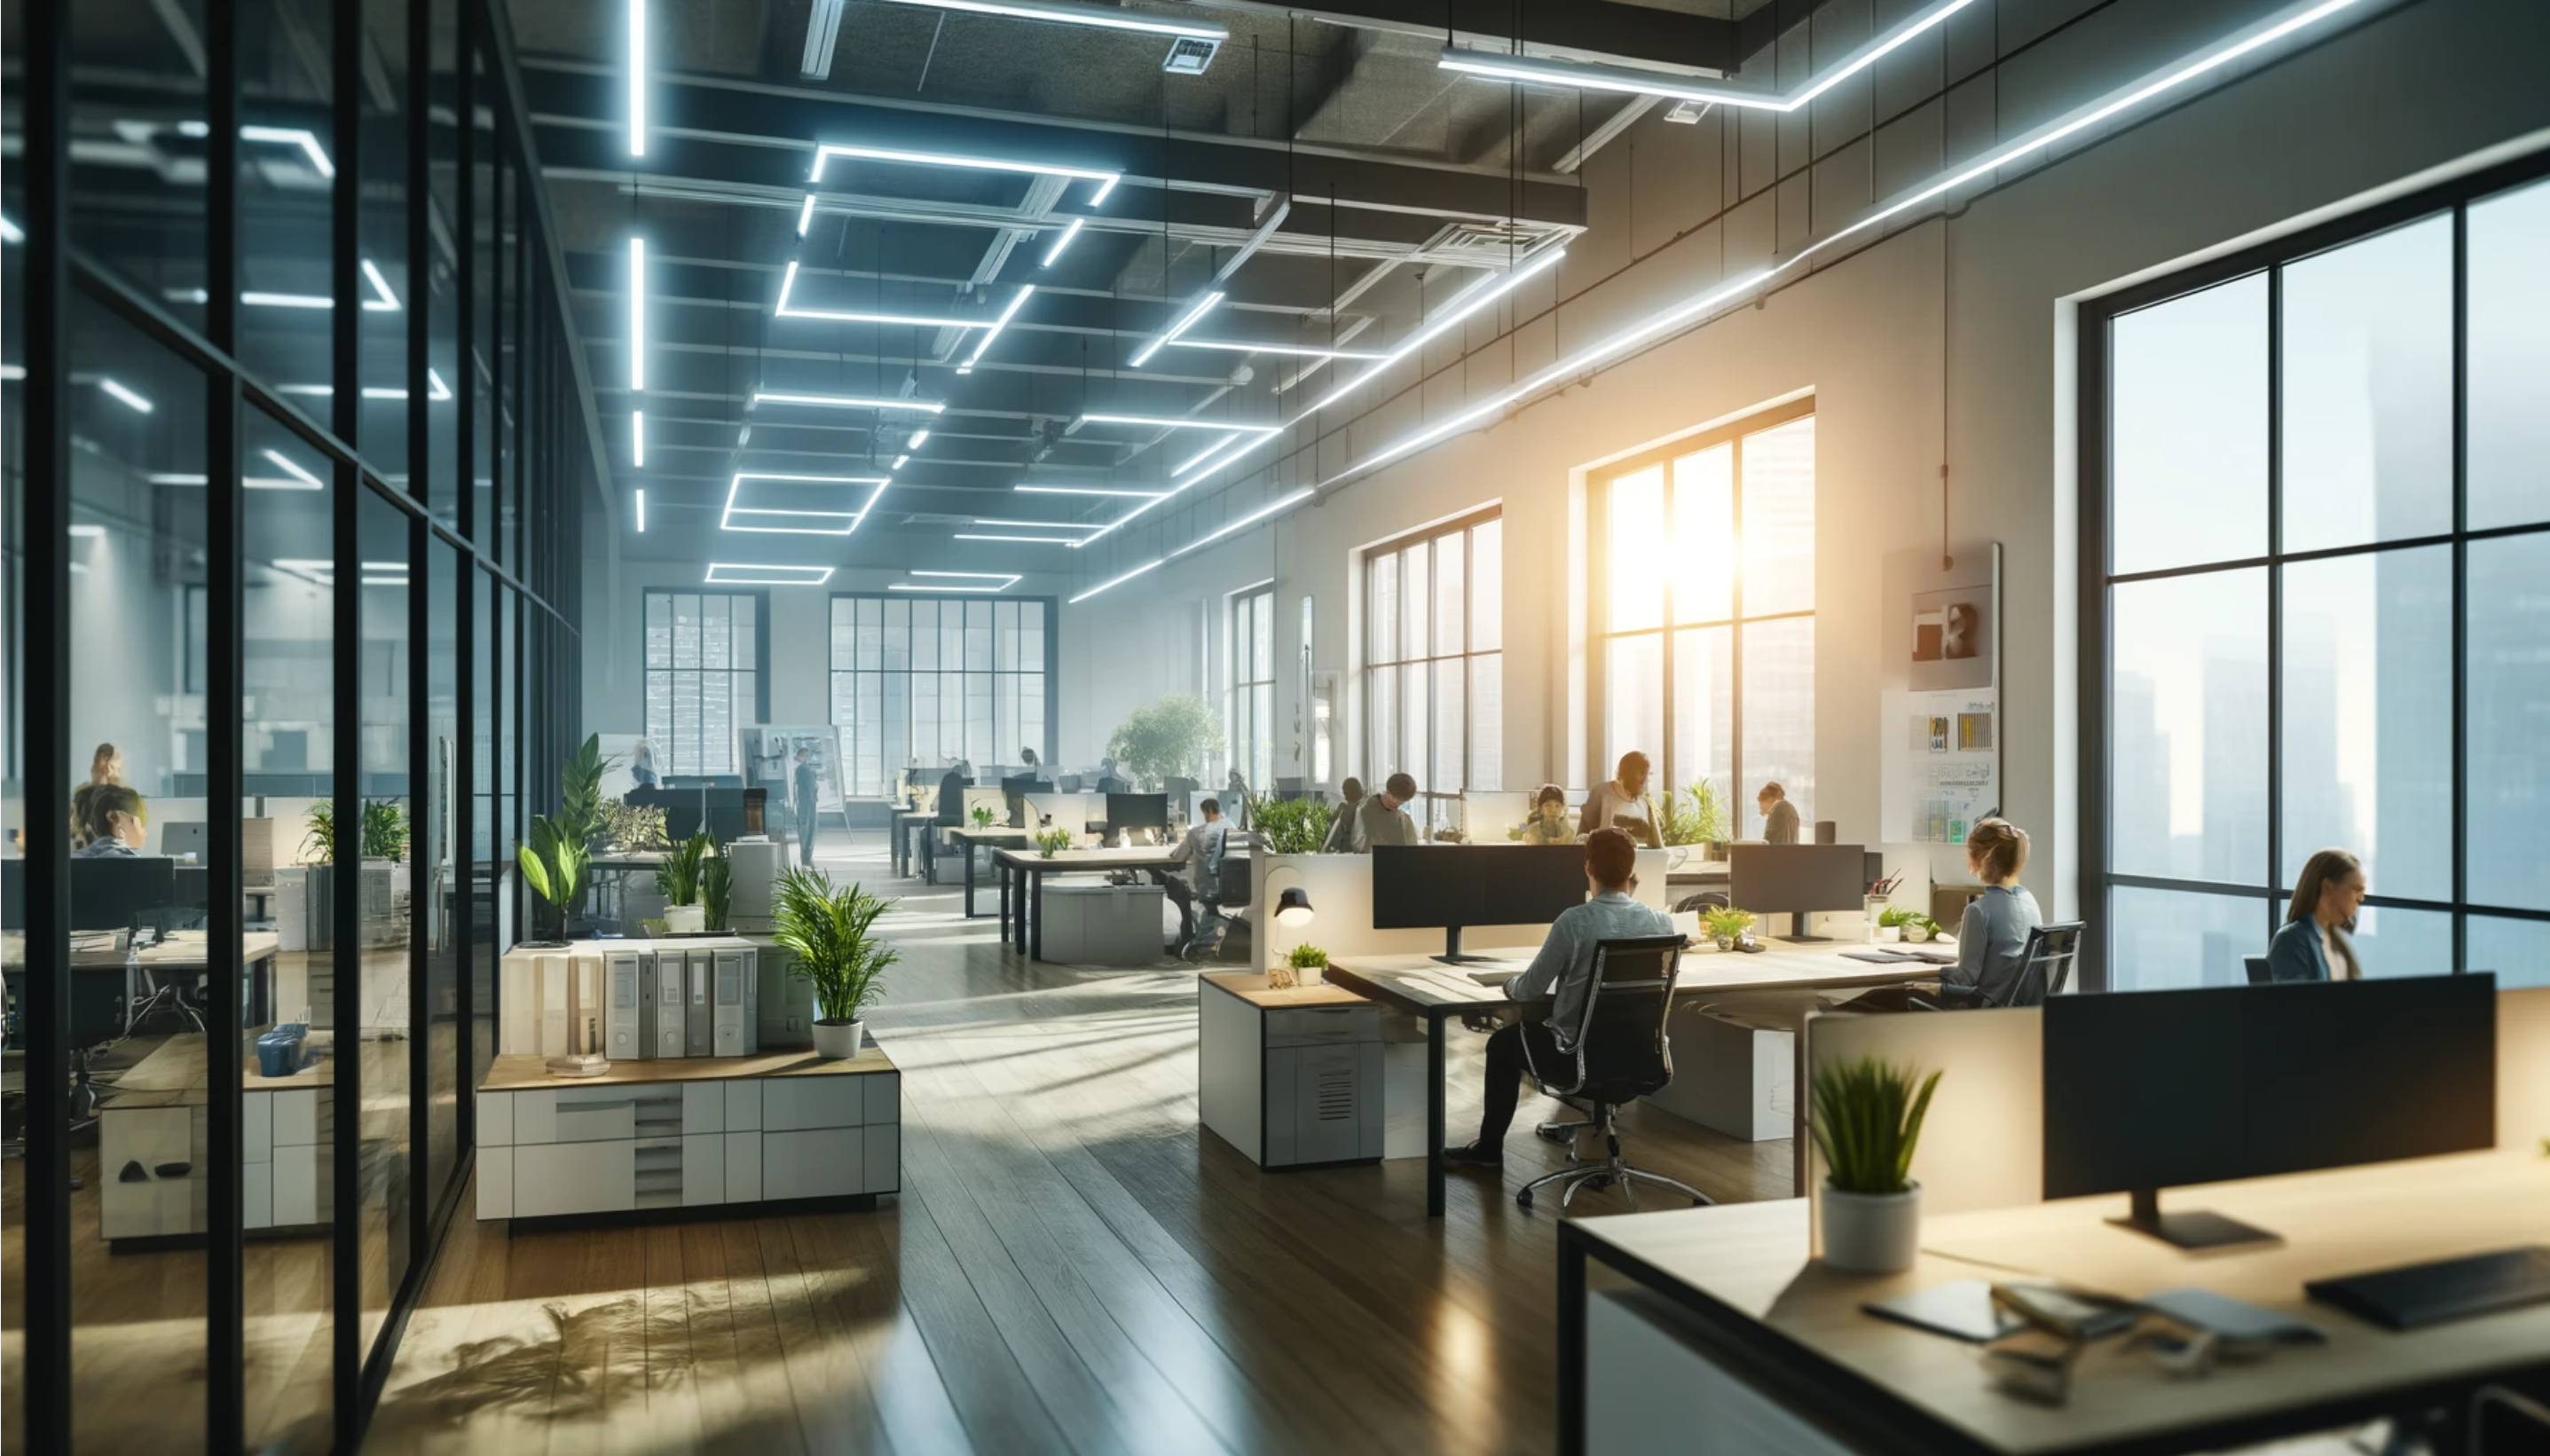 led lighting in the workplace